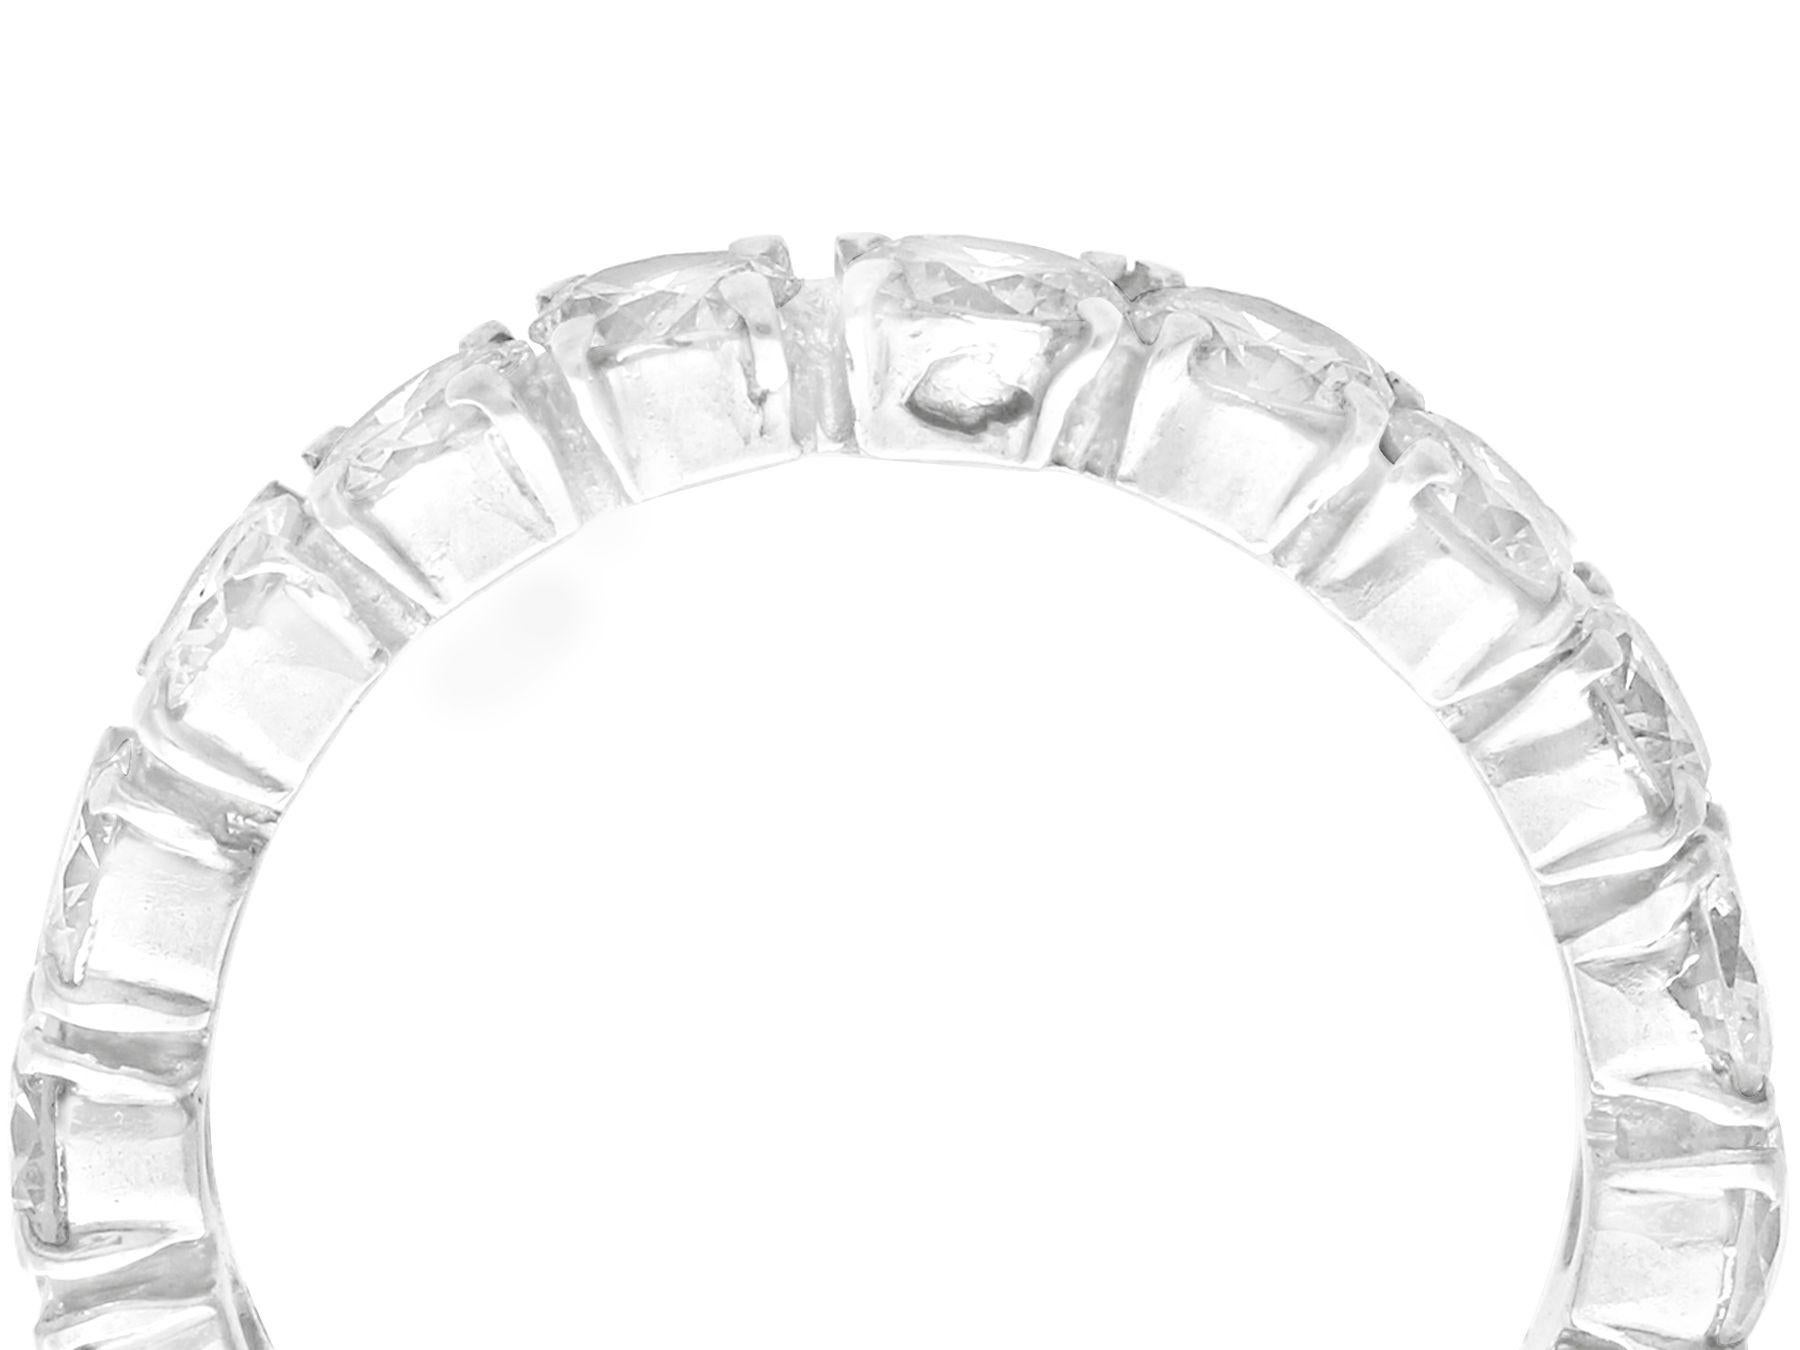 A stunning, fine and impressive vintage 1950s 2.57 carat diamond and platinum full eternity ring; part of our diverse diamond jewelry and estate jewelry collections

This stunning, fine and impressive vintage diamond eternity ring has been crafted